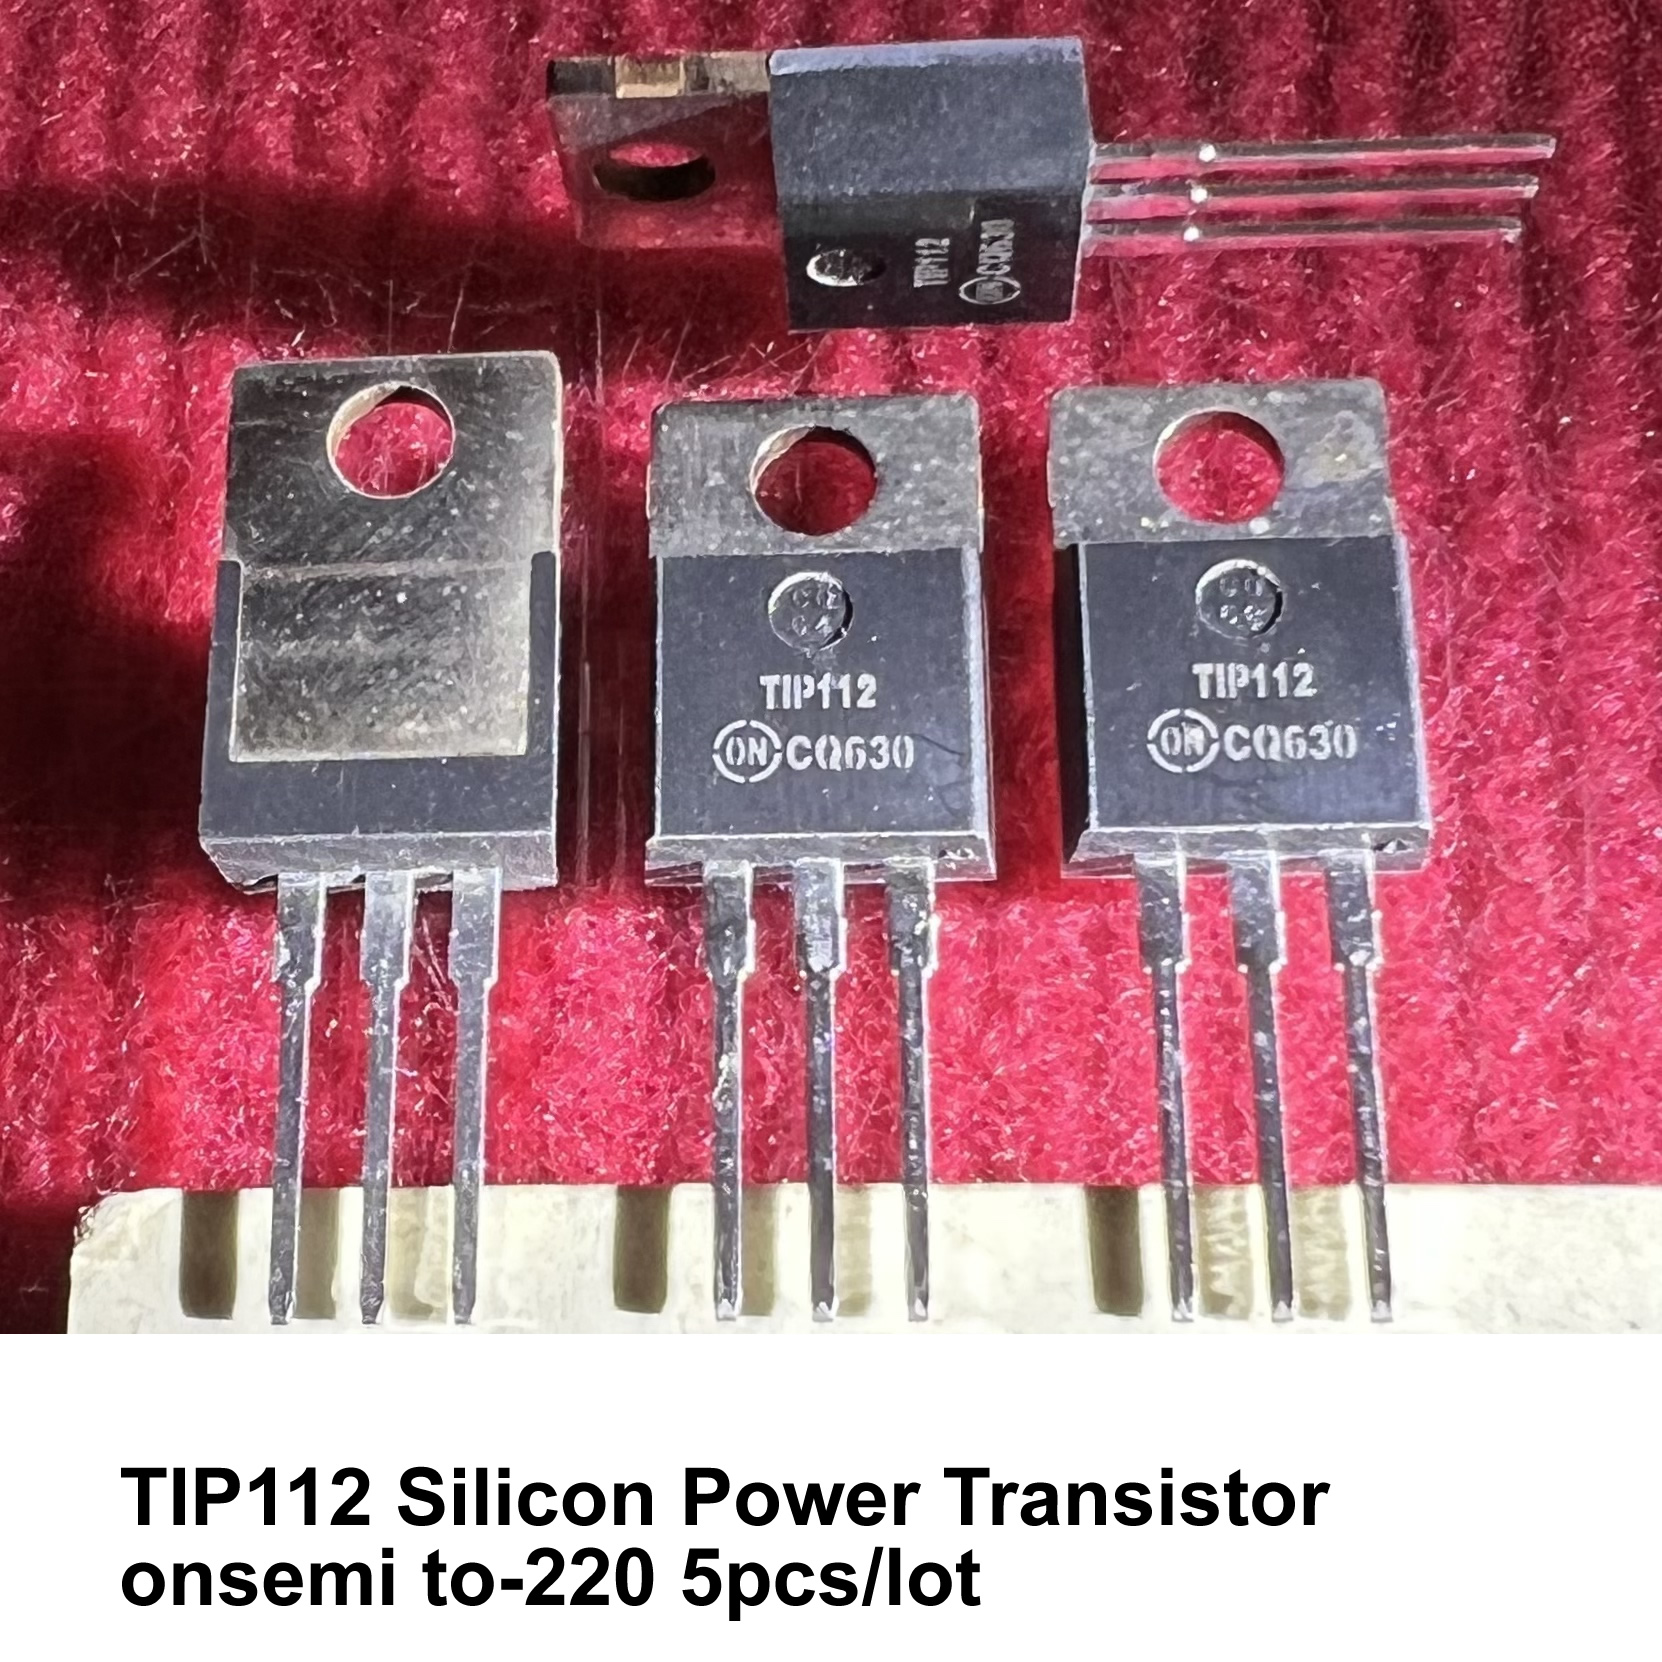 TIP112 Silicon Power Transistor onsemi to-220 5pcs/lot